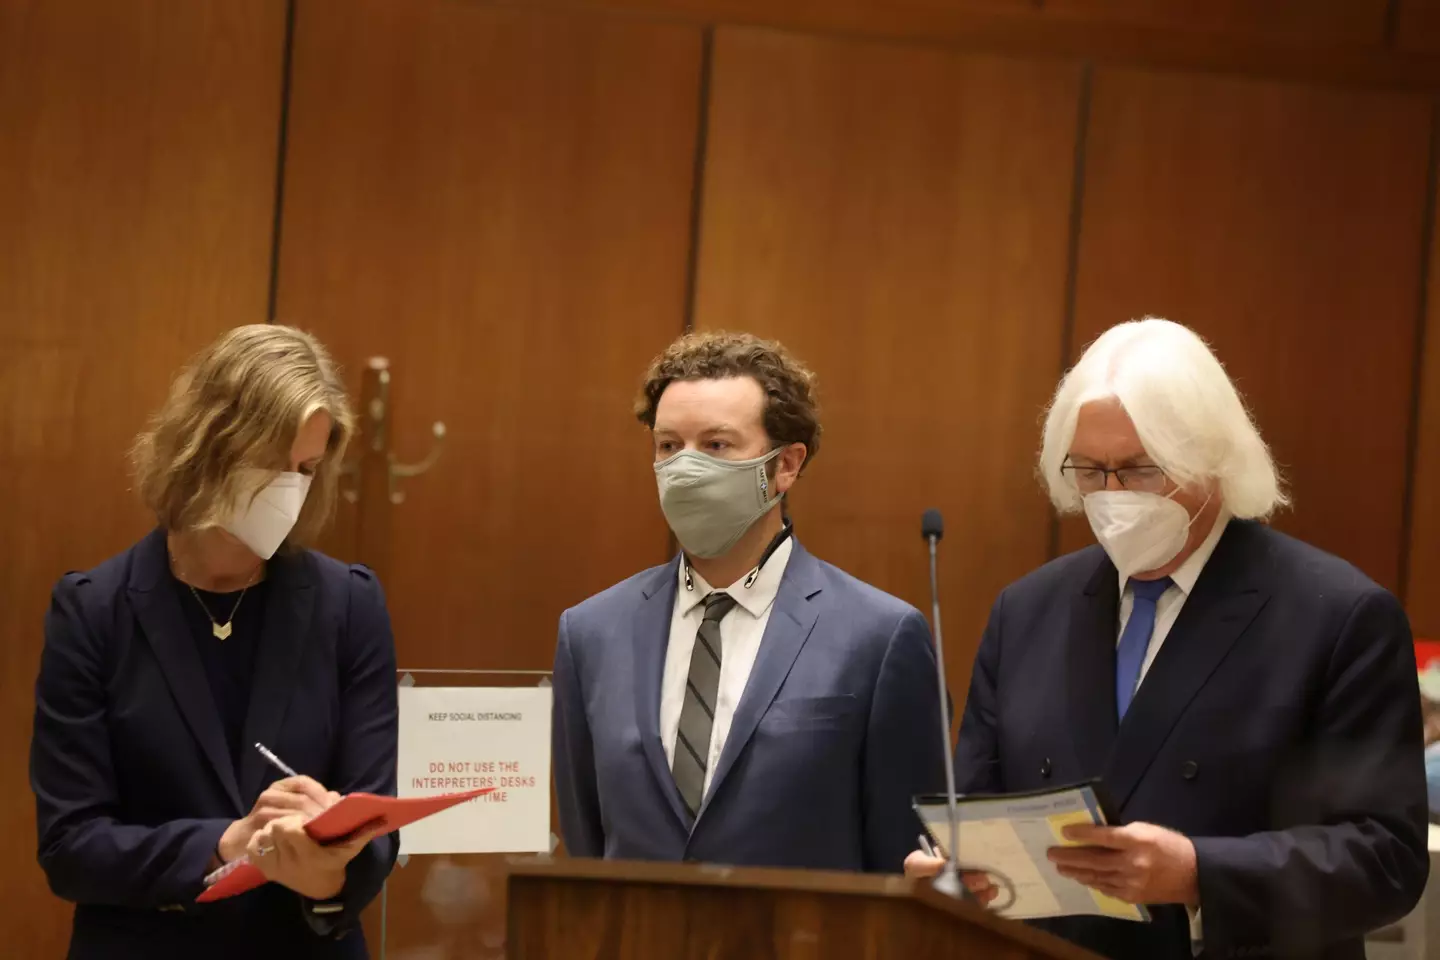 Danny Masterson as he is arraigned on three rape charges in September 2020.